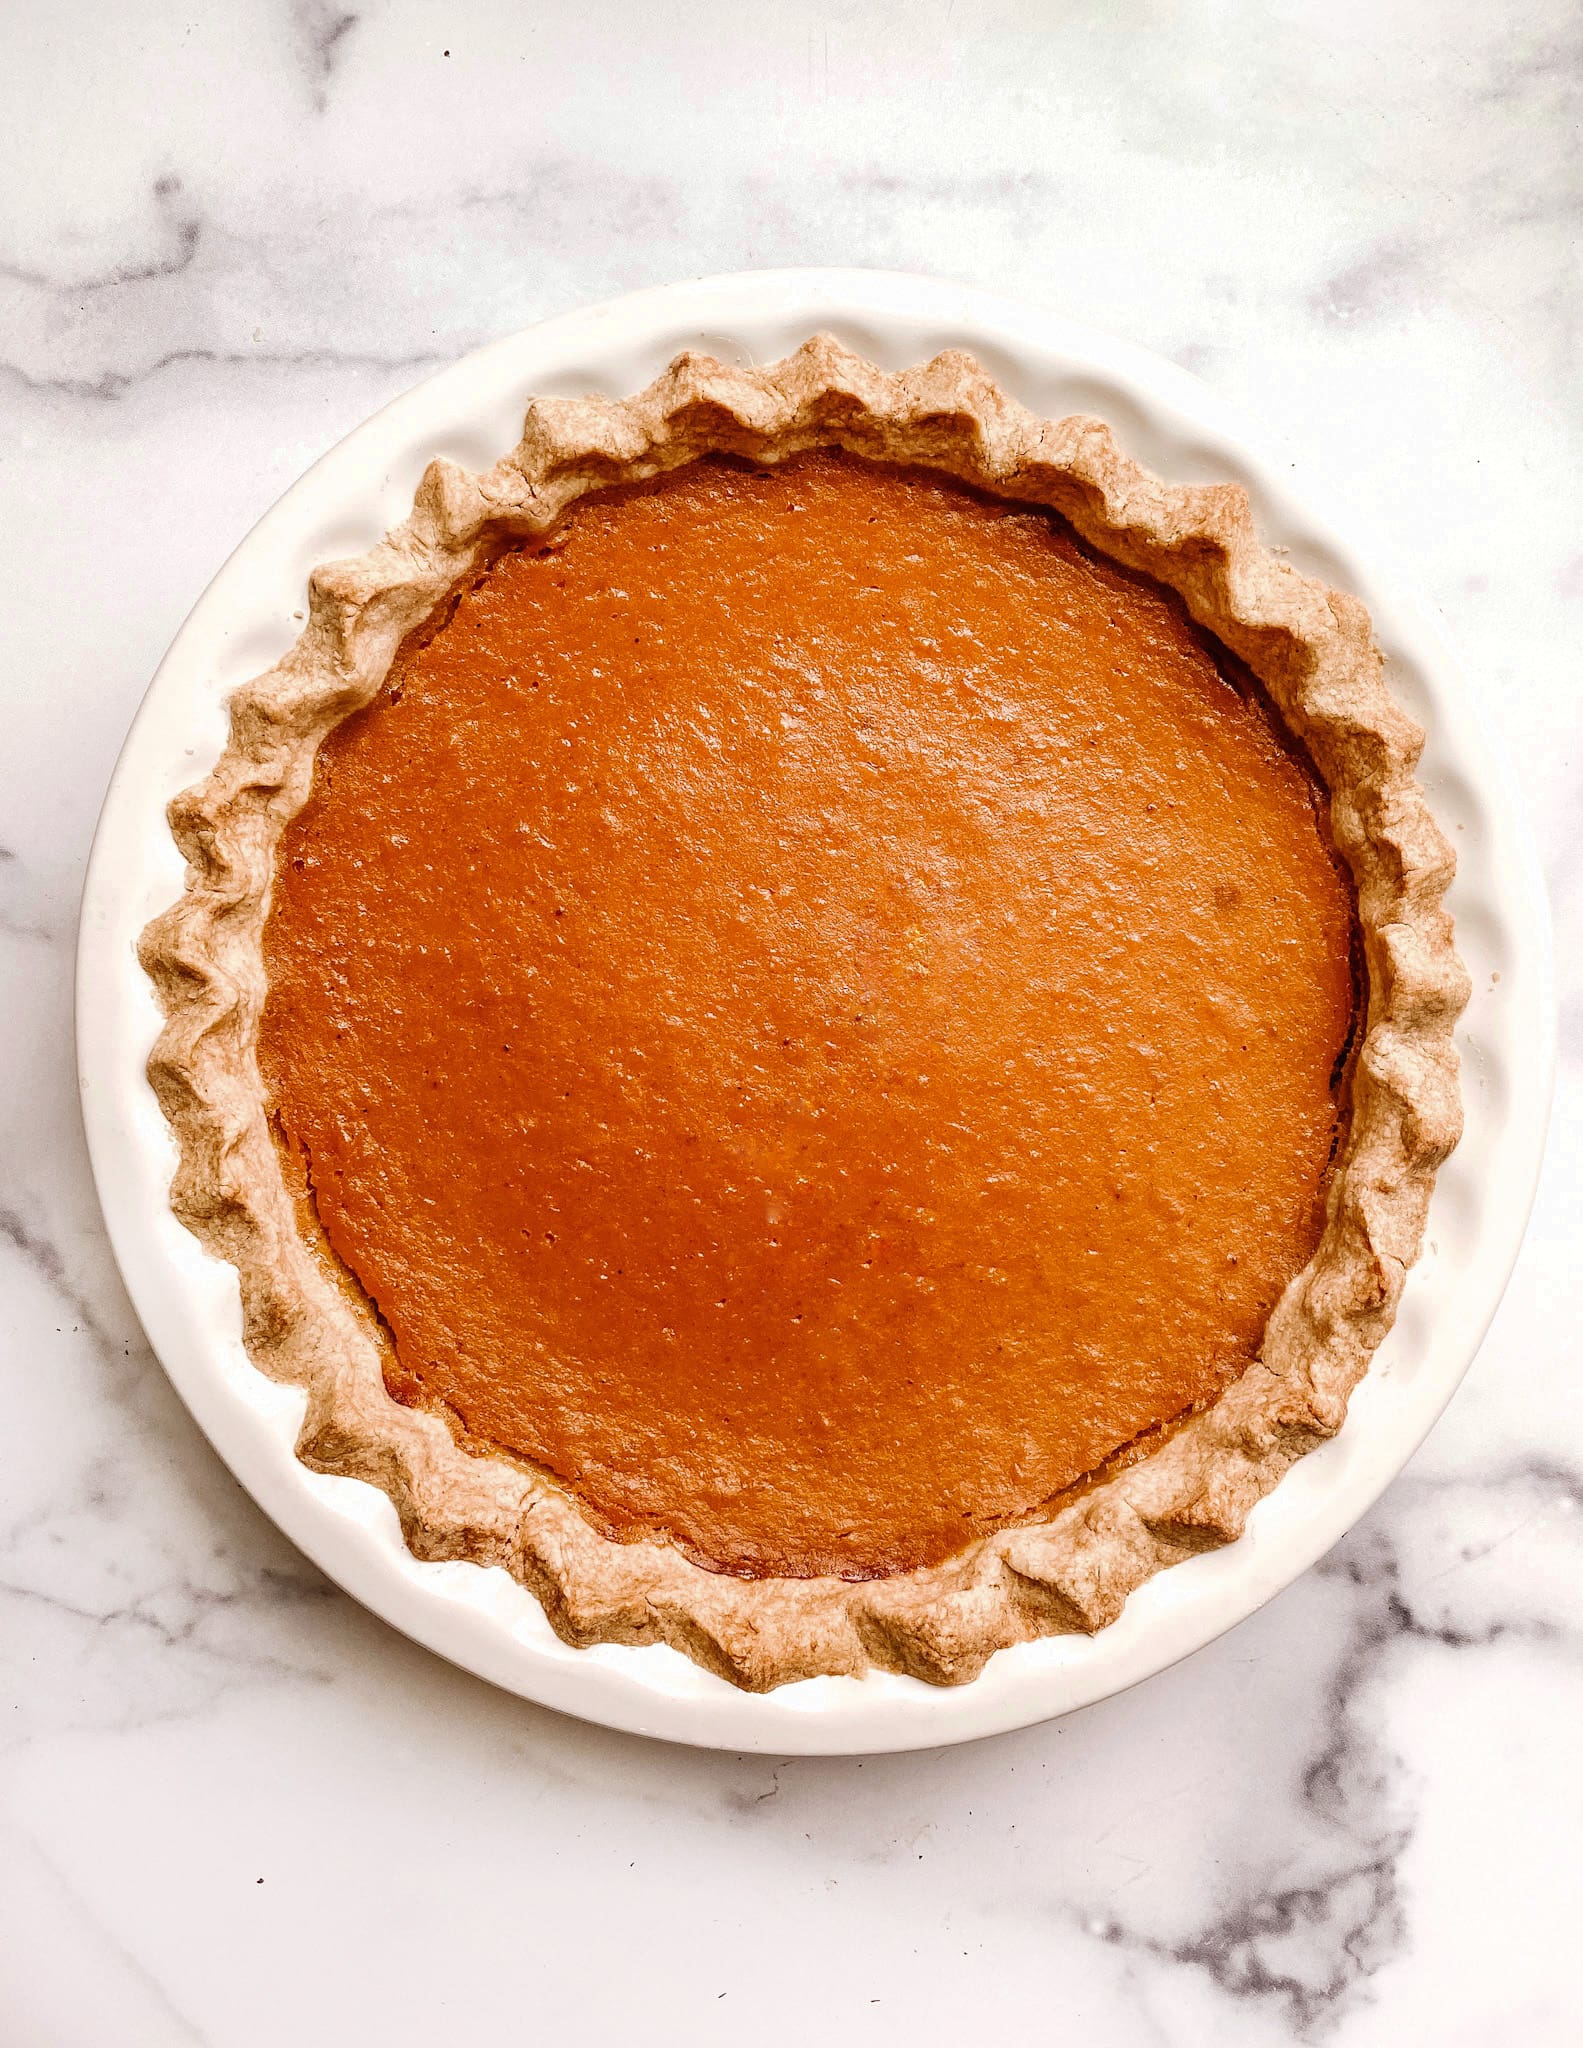 gluten-free sweet potato pie with a smooth orange top in a ceramic white dish on a marble backdrop